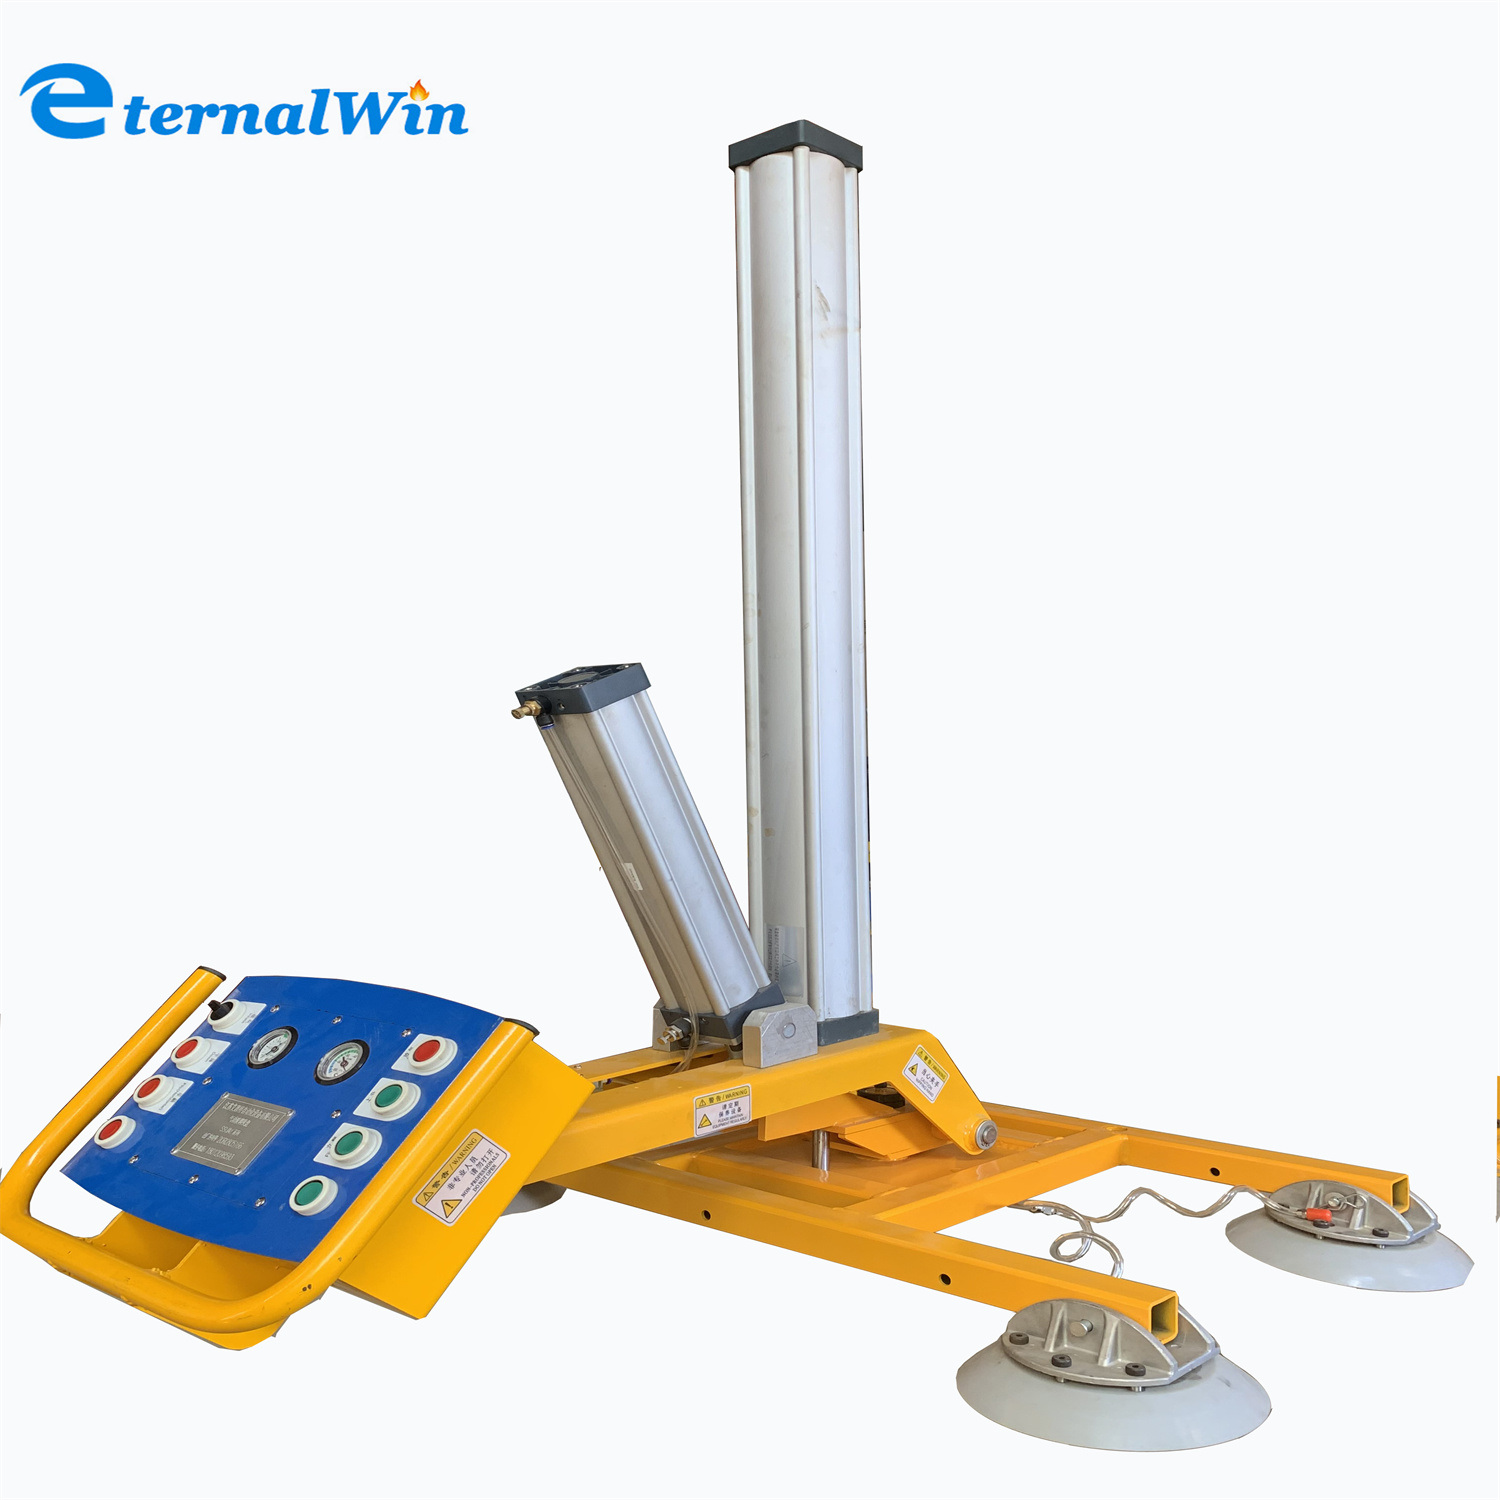 Pneumatic Vacuum Lifter for Glazing Glass/Installing Glass